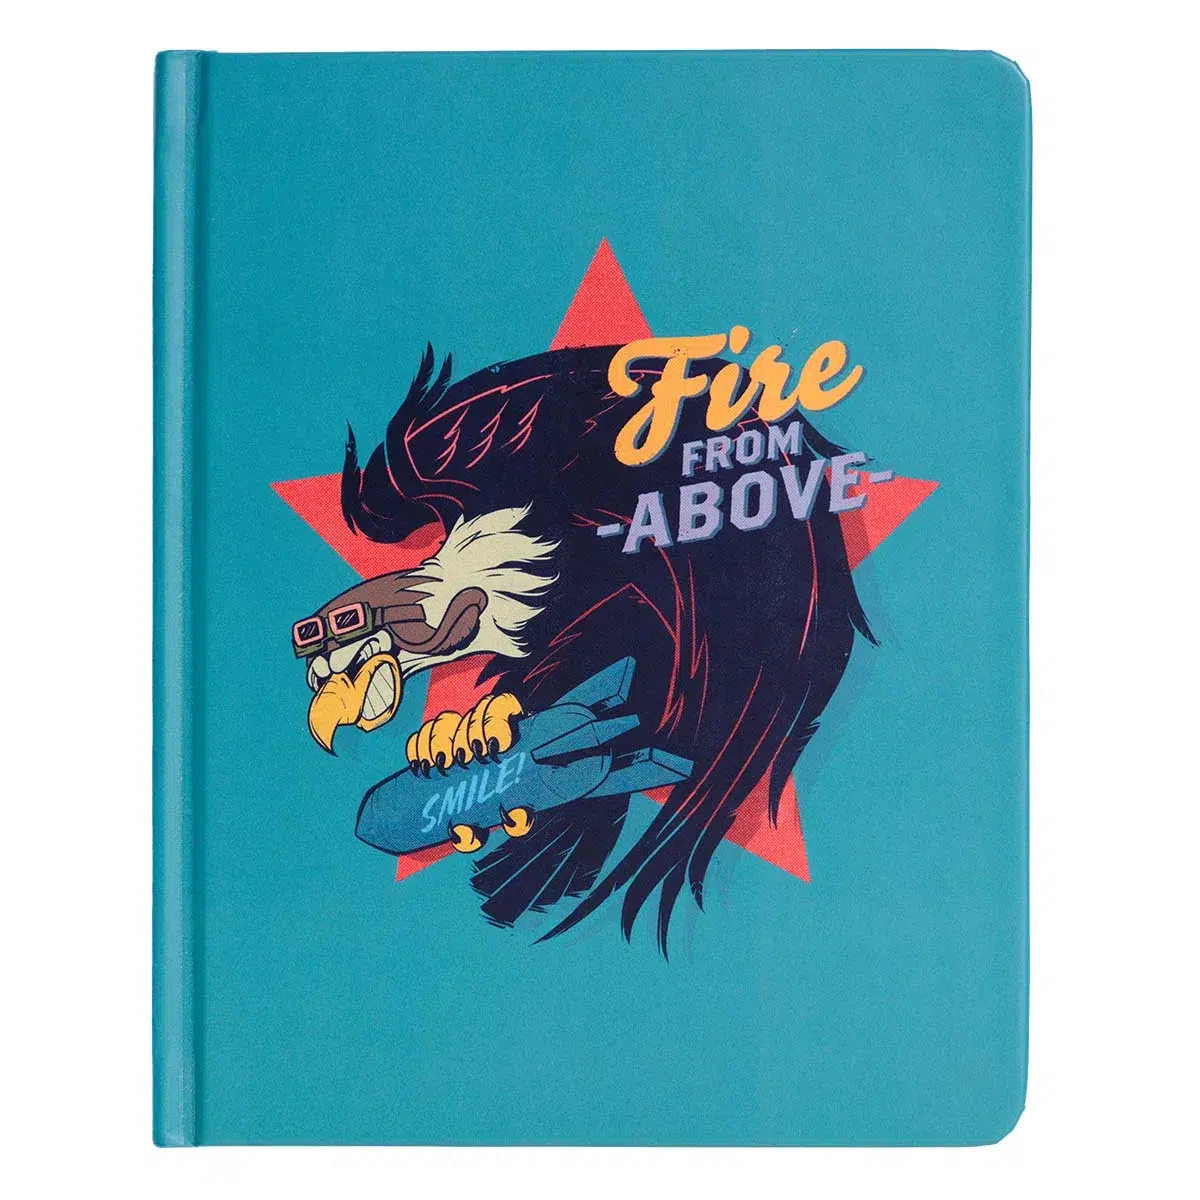 Call of Duty: Notebook "Eagle"